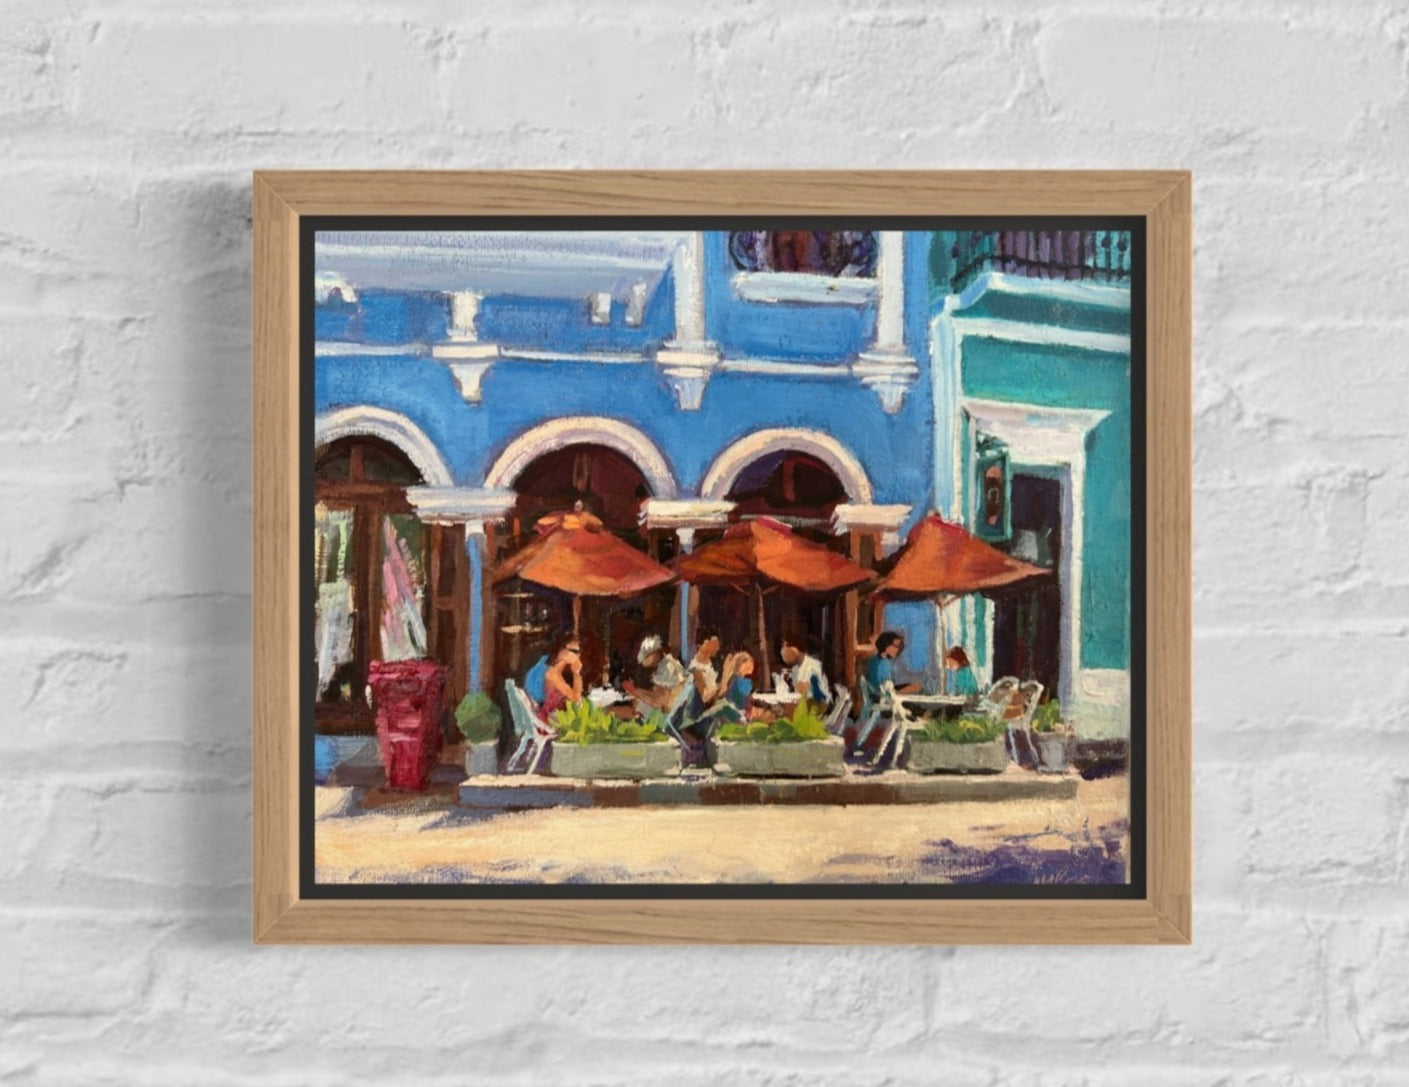 LUNCH UNDER THE RED UMBRELLAS IN OLD SAN JUAN - Original Oil Painting